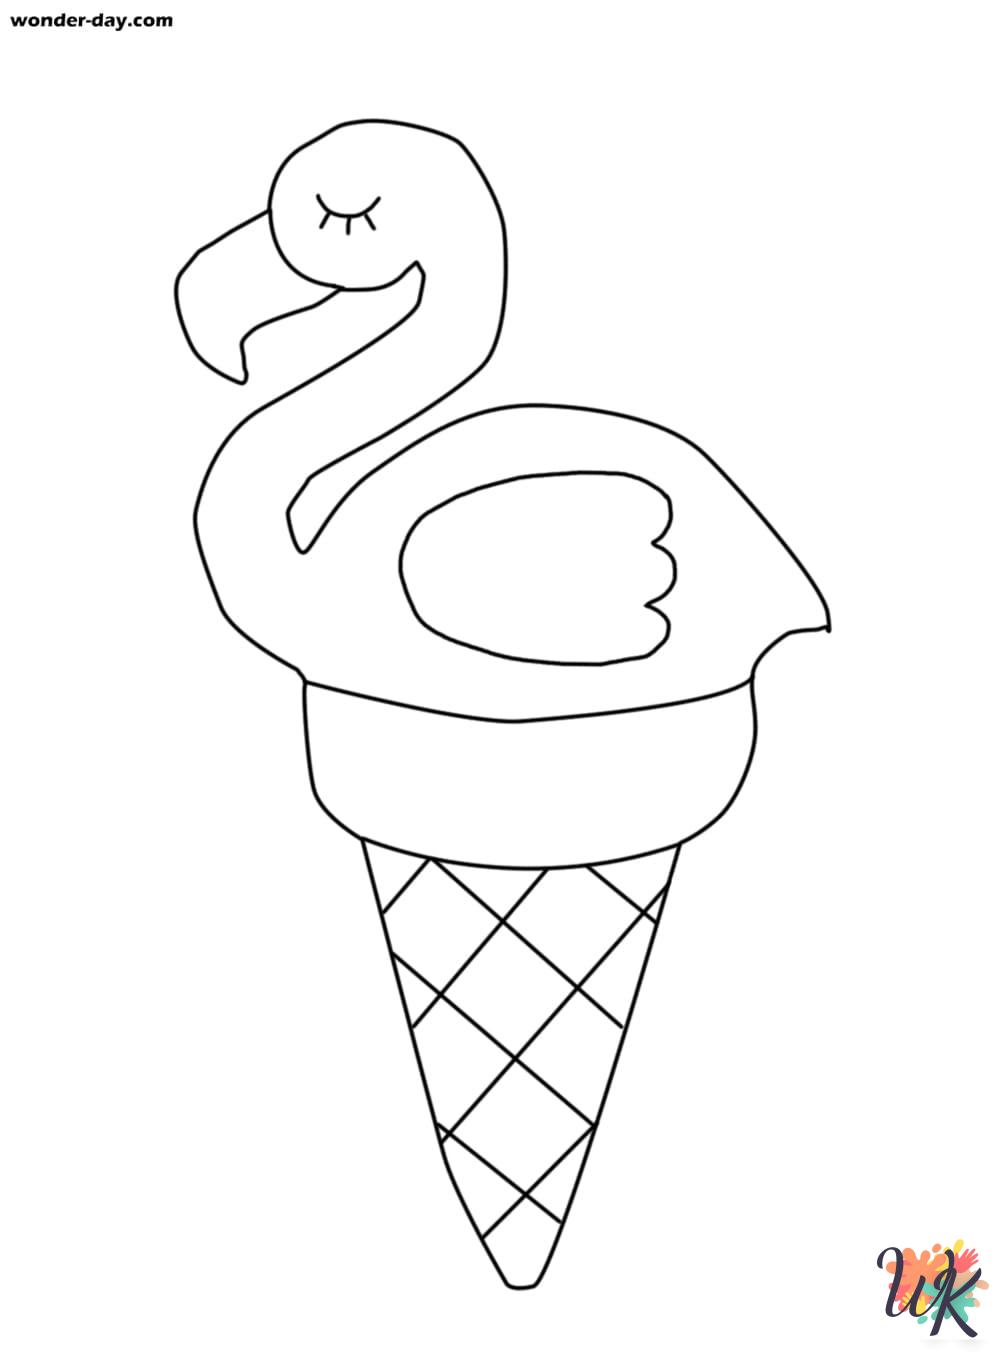 Flamingo coloring pages free printable